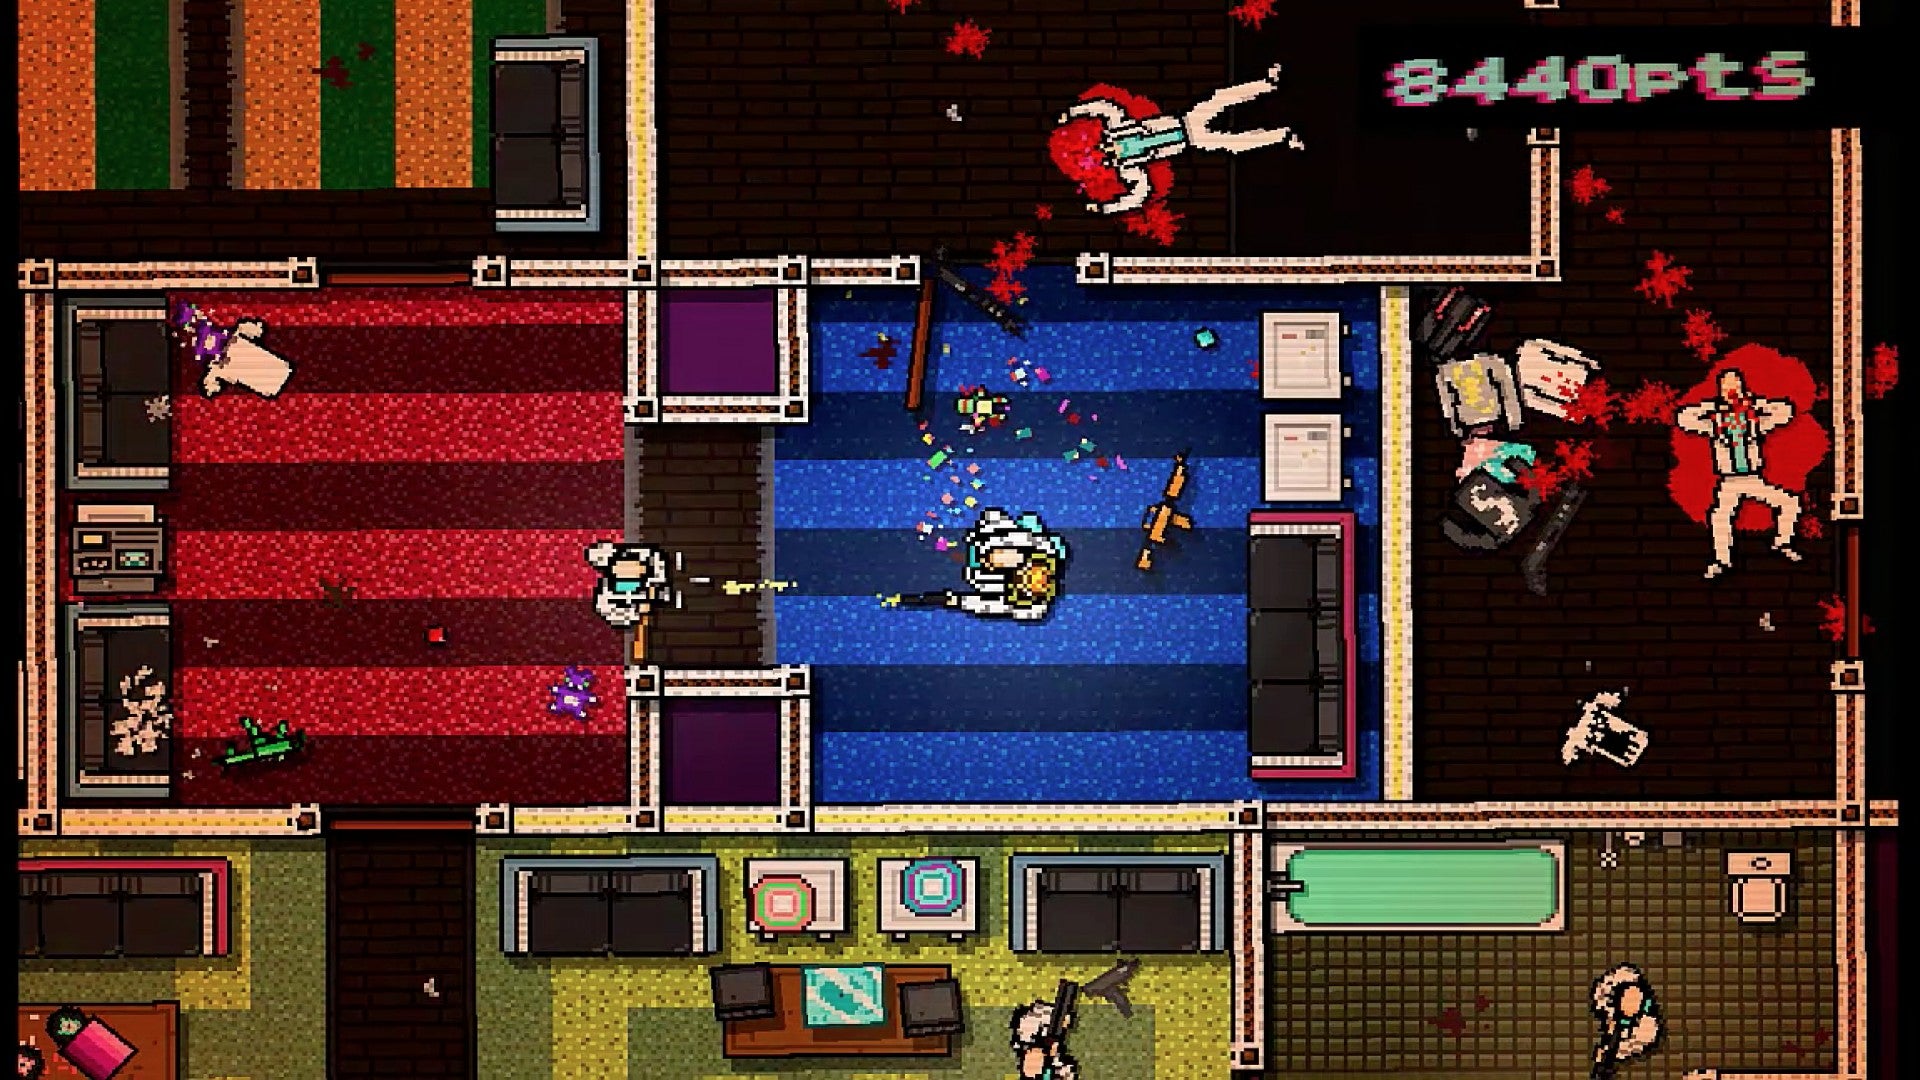 A lounge is covered in gruesome bodies and blood in Hotline Miami